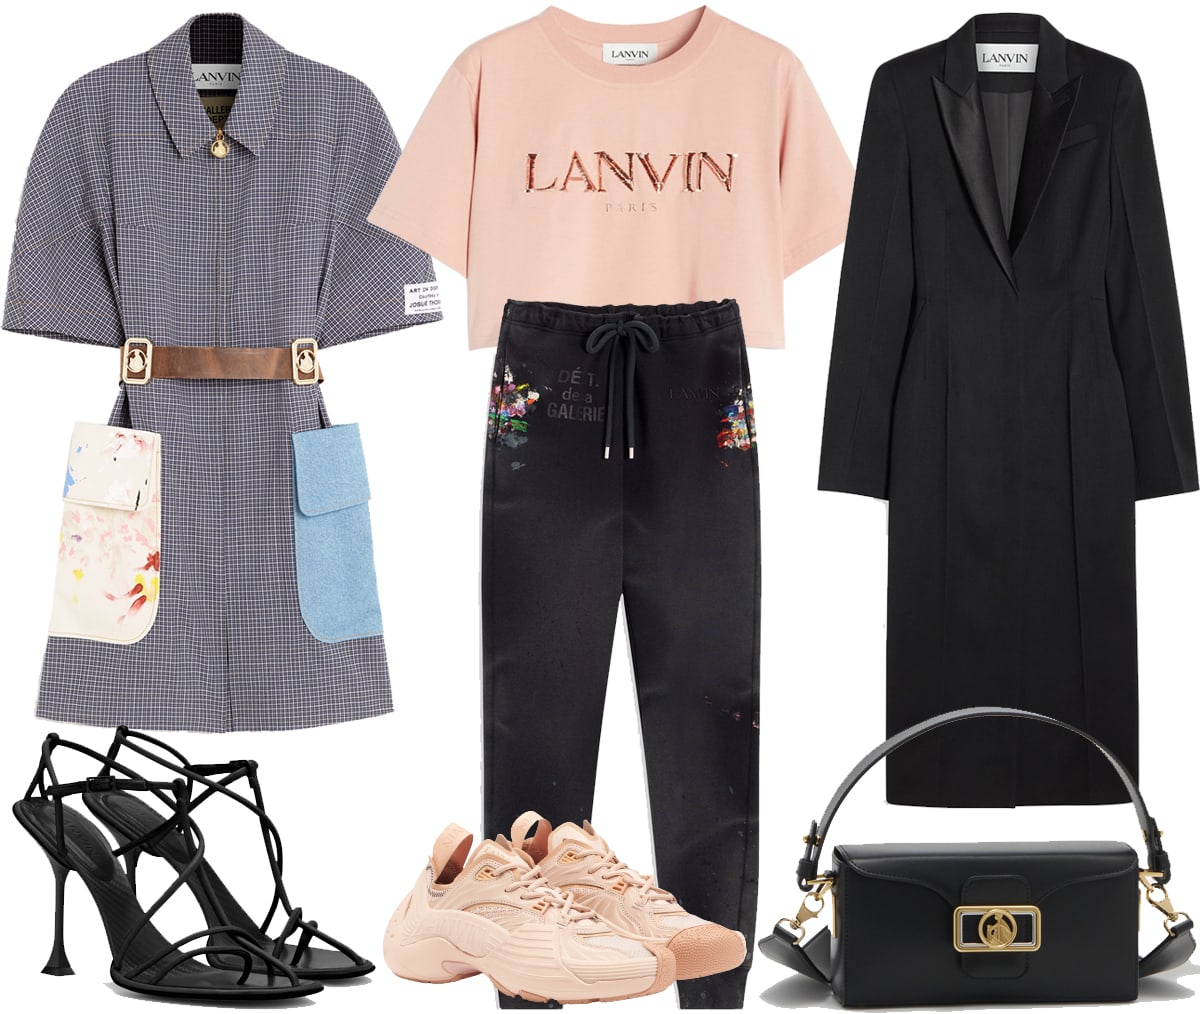 Lanvin's bags, footwear, and ready-to-wear collections are mostly made in Italy